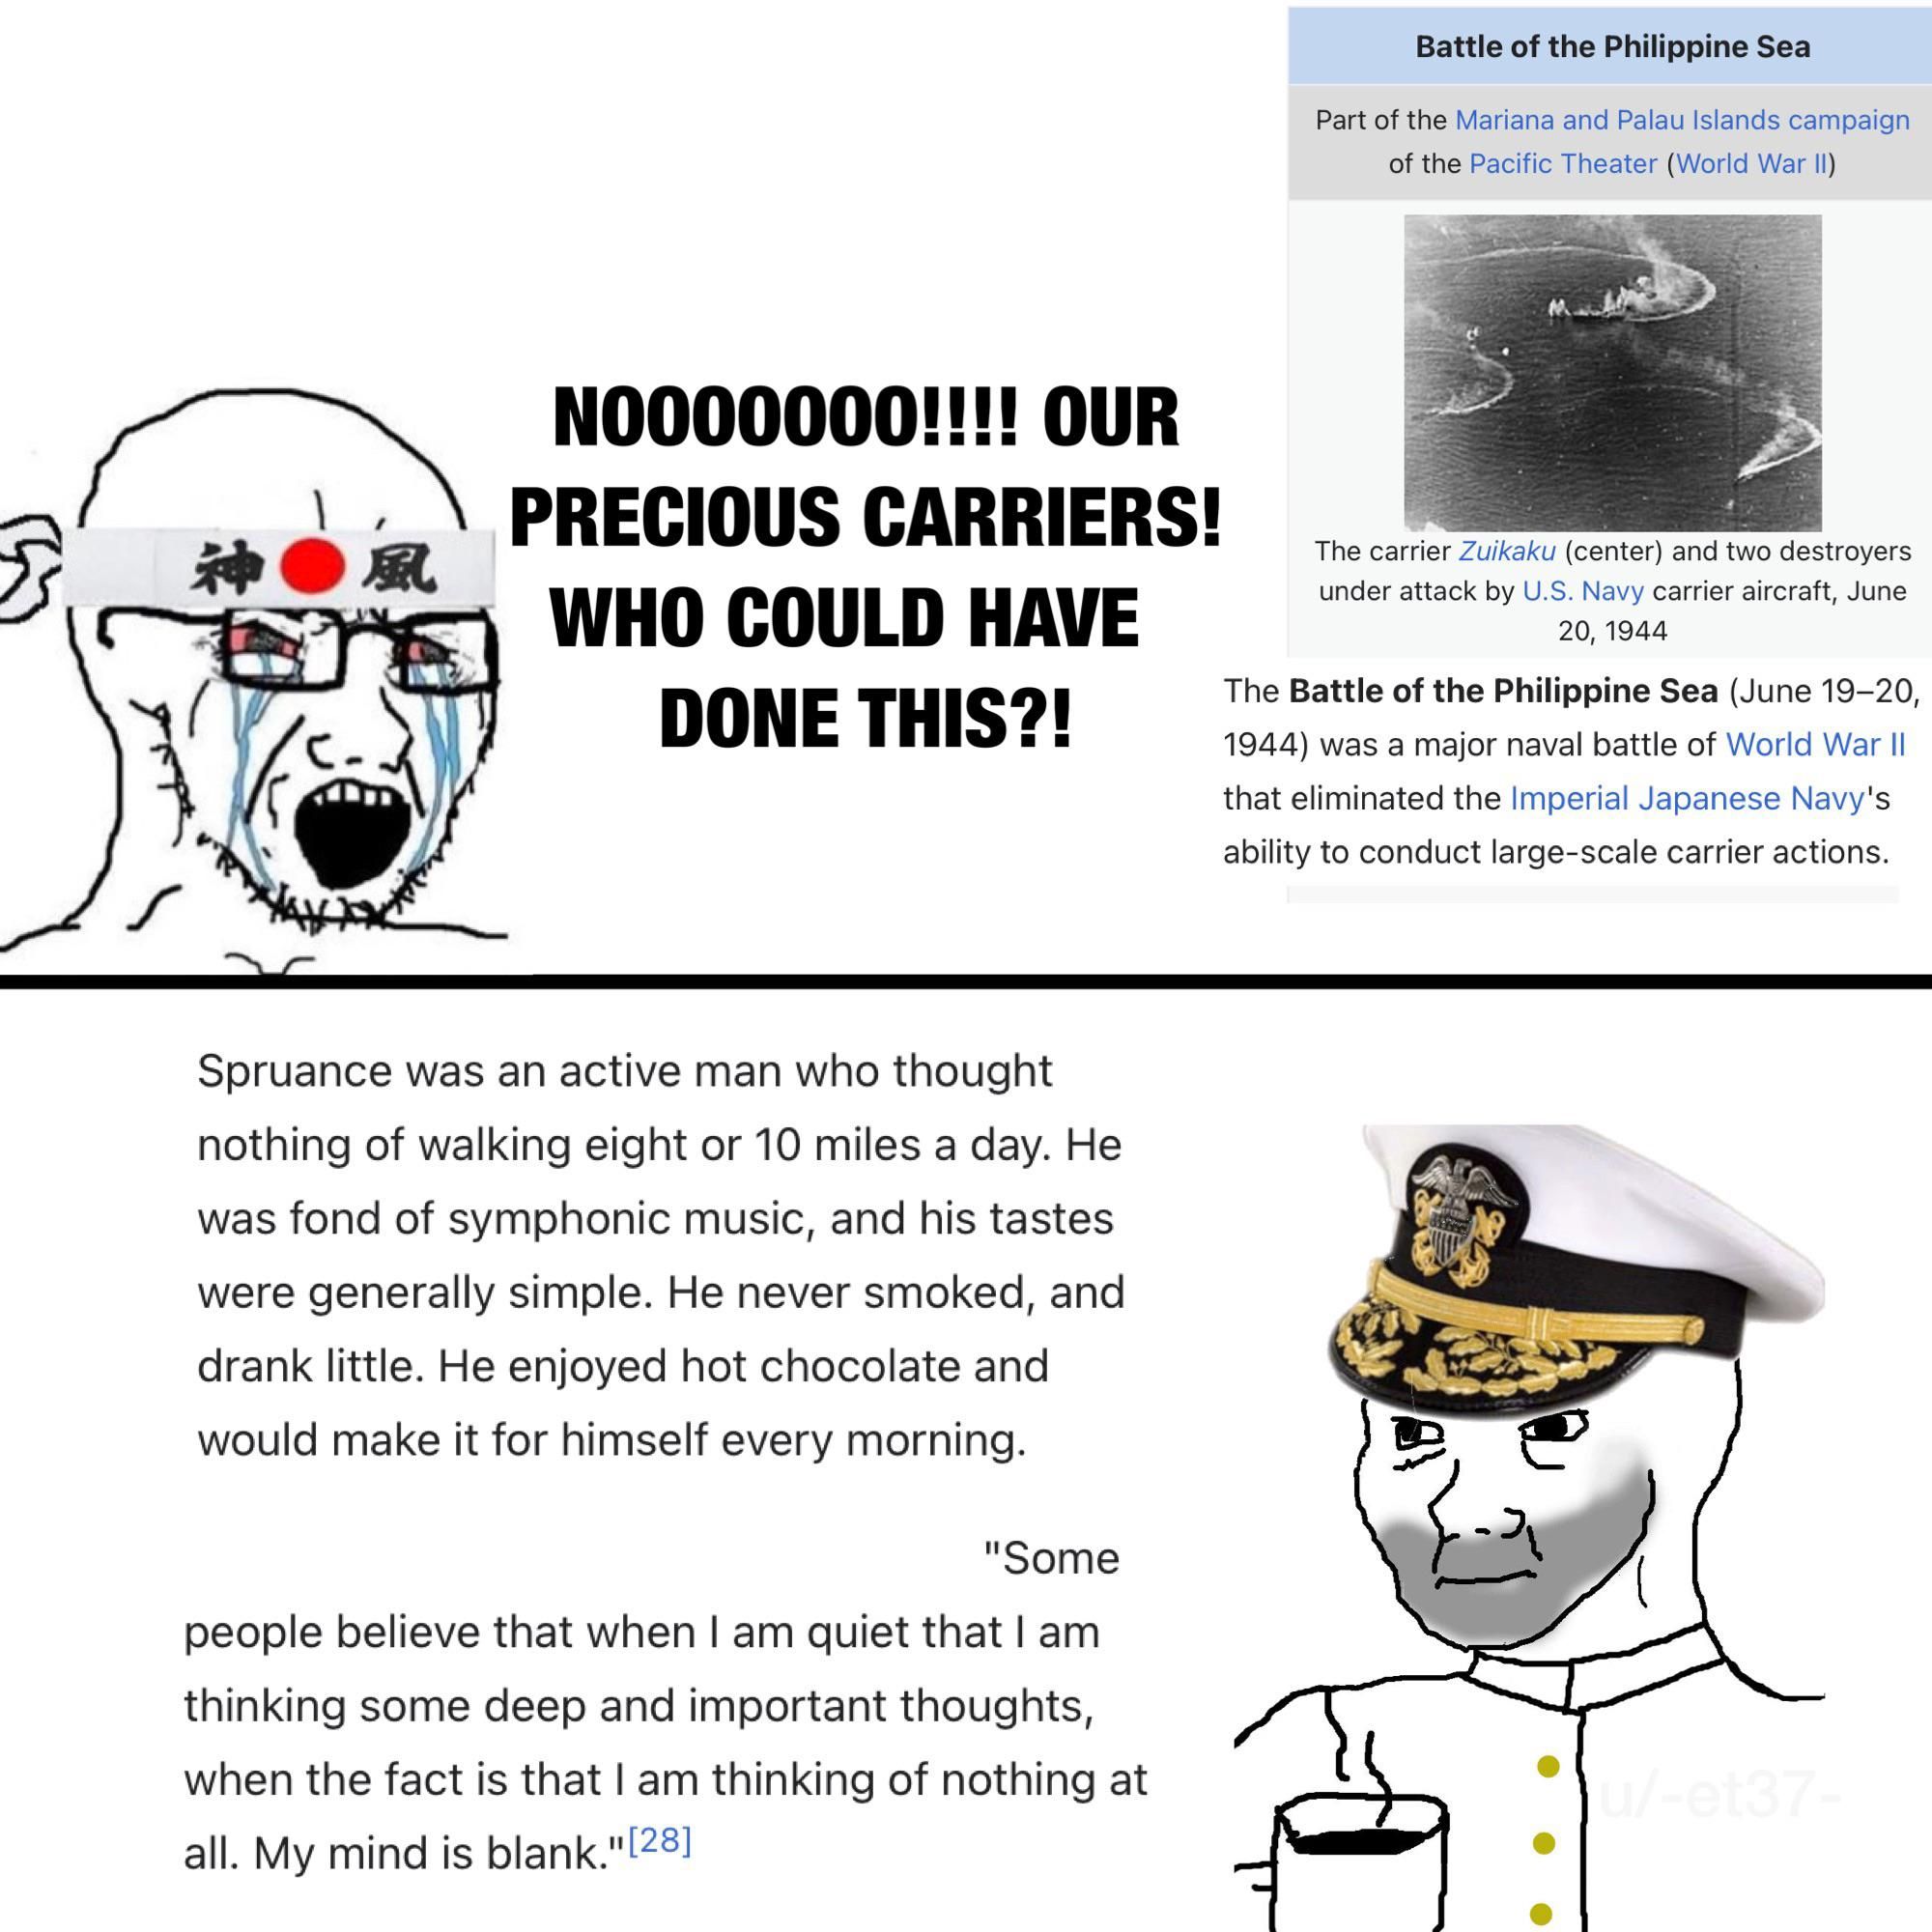 Admiral Spruance was an underrated Chad.